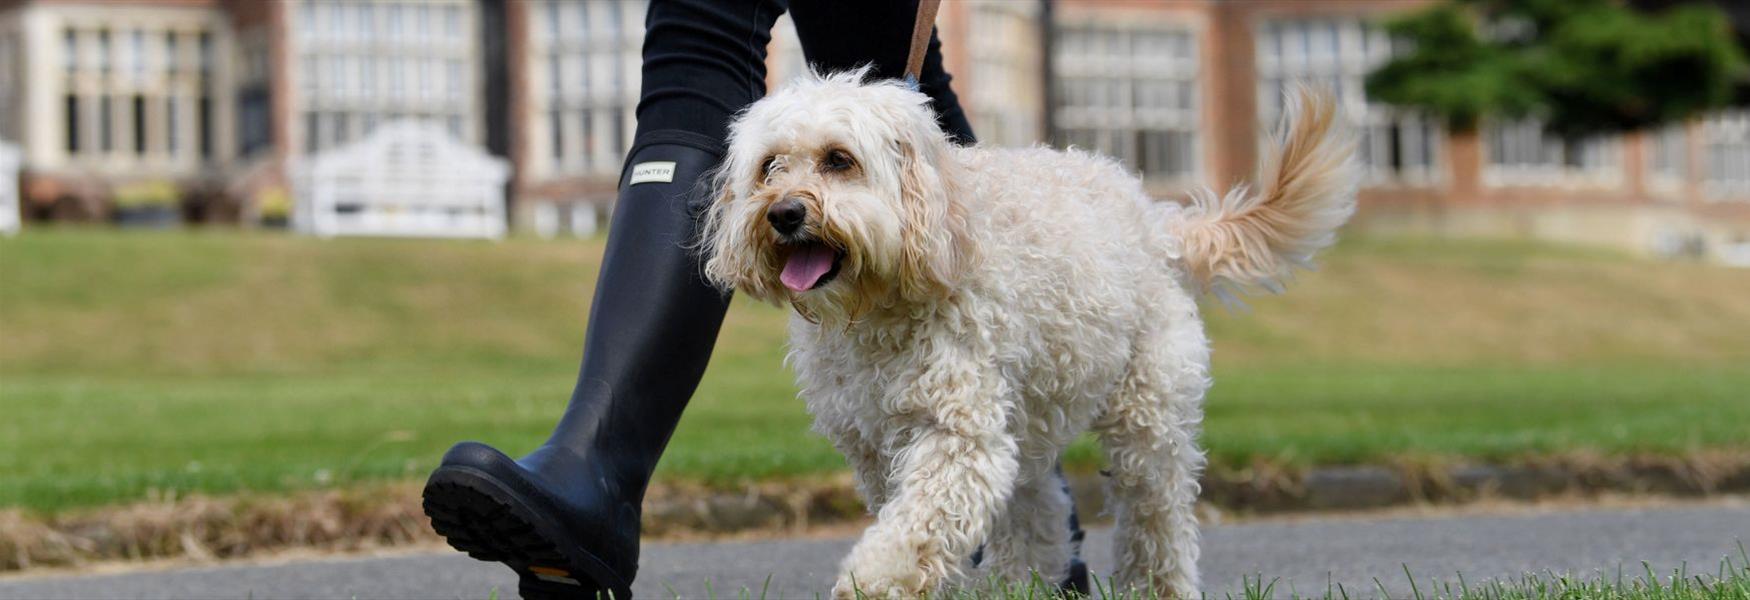 Dogs are welcome at De Vere Beaumont Estate